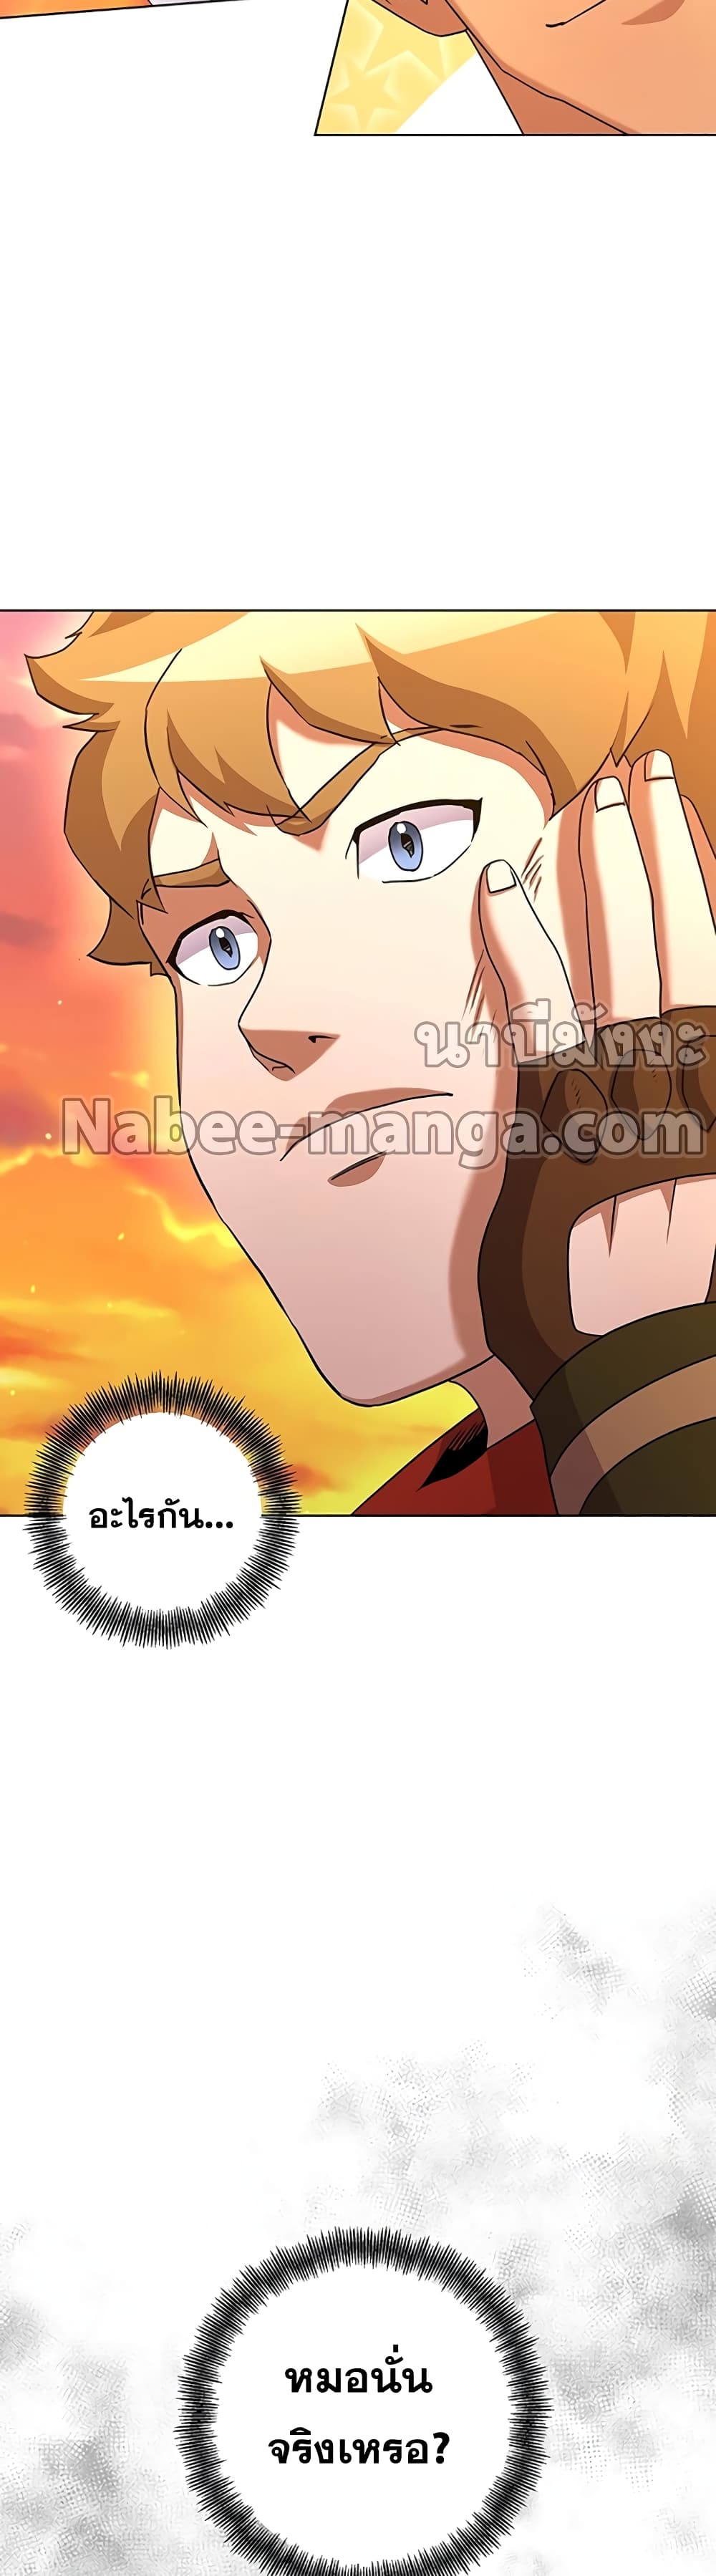 Surviving in an Action Manhwa 23-23